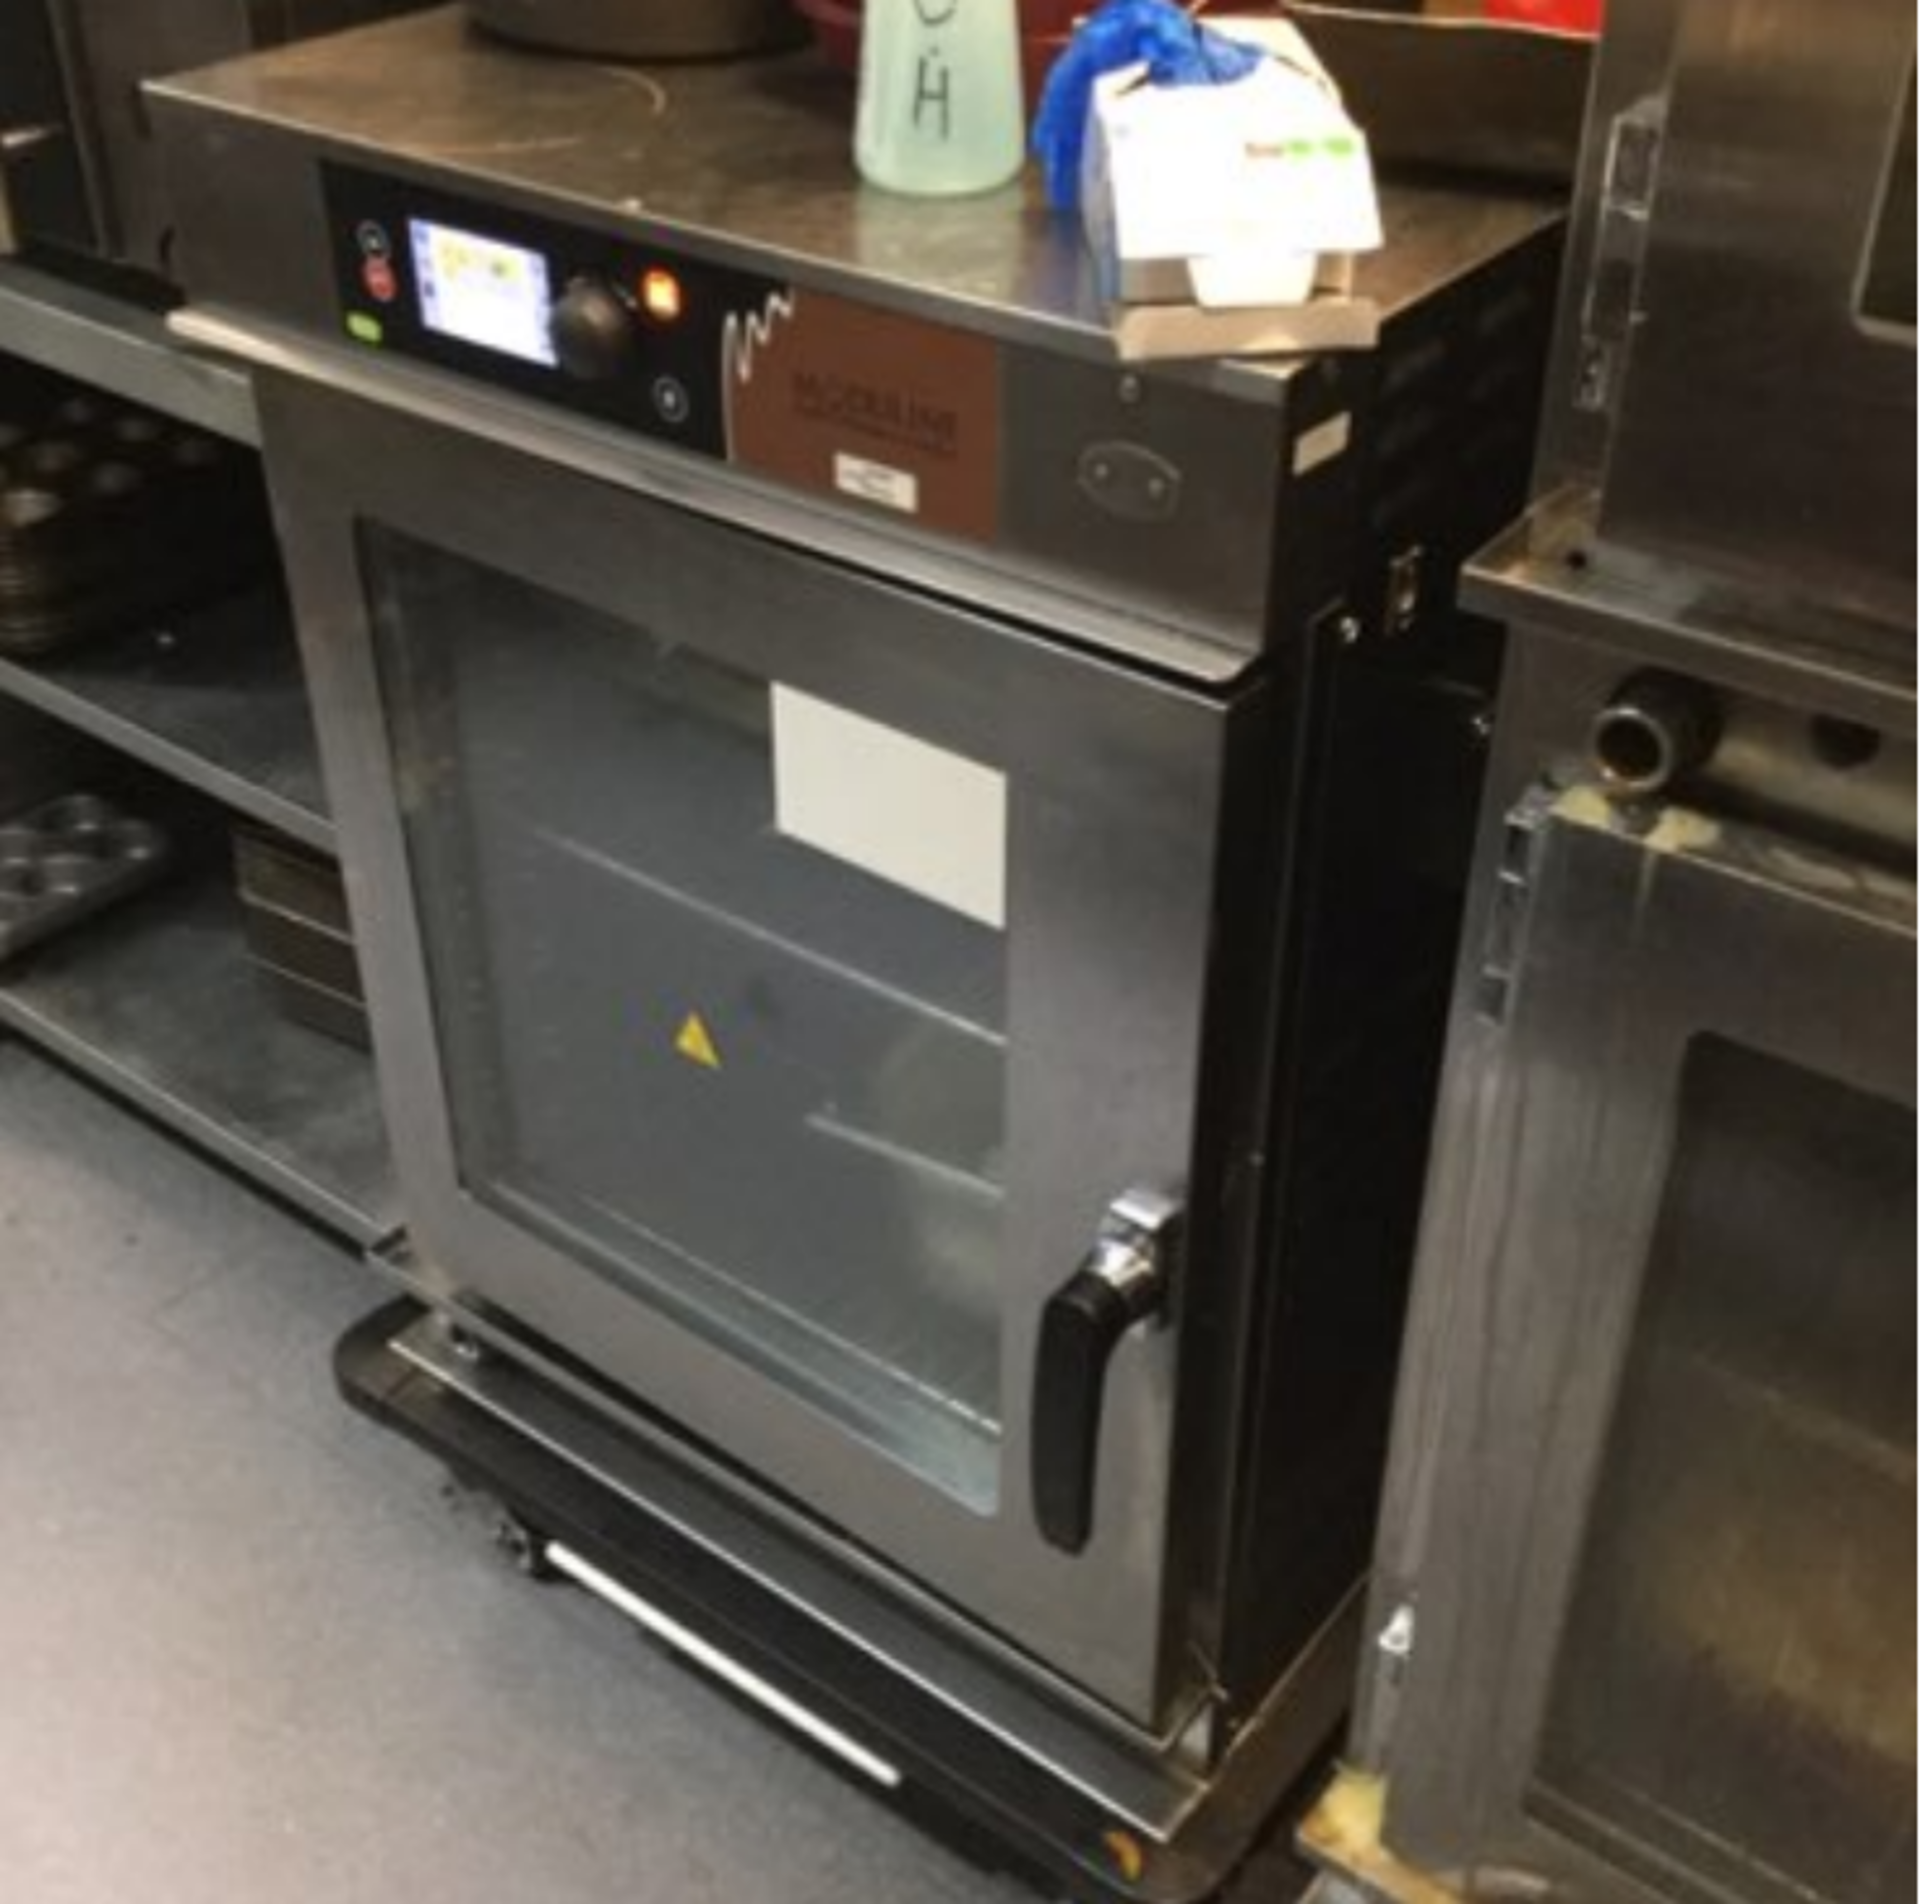 Single Moduline cook and hold oven less than 2 years old Oven, single phase electric